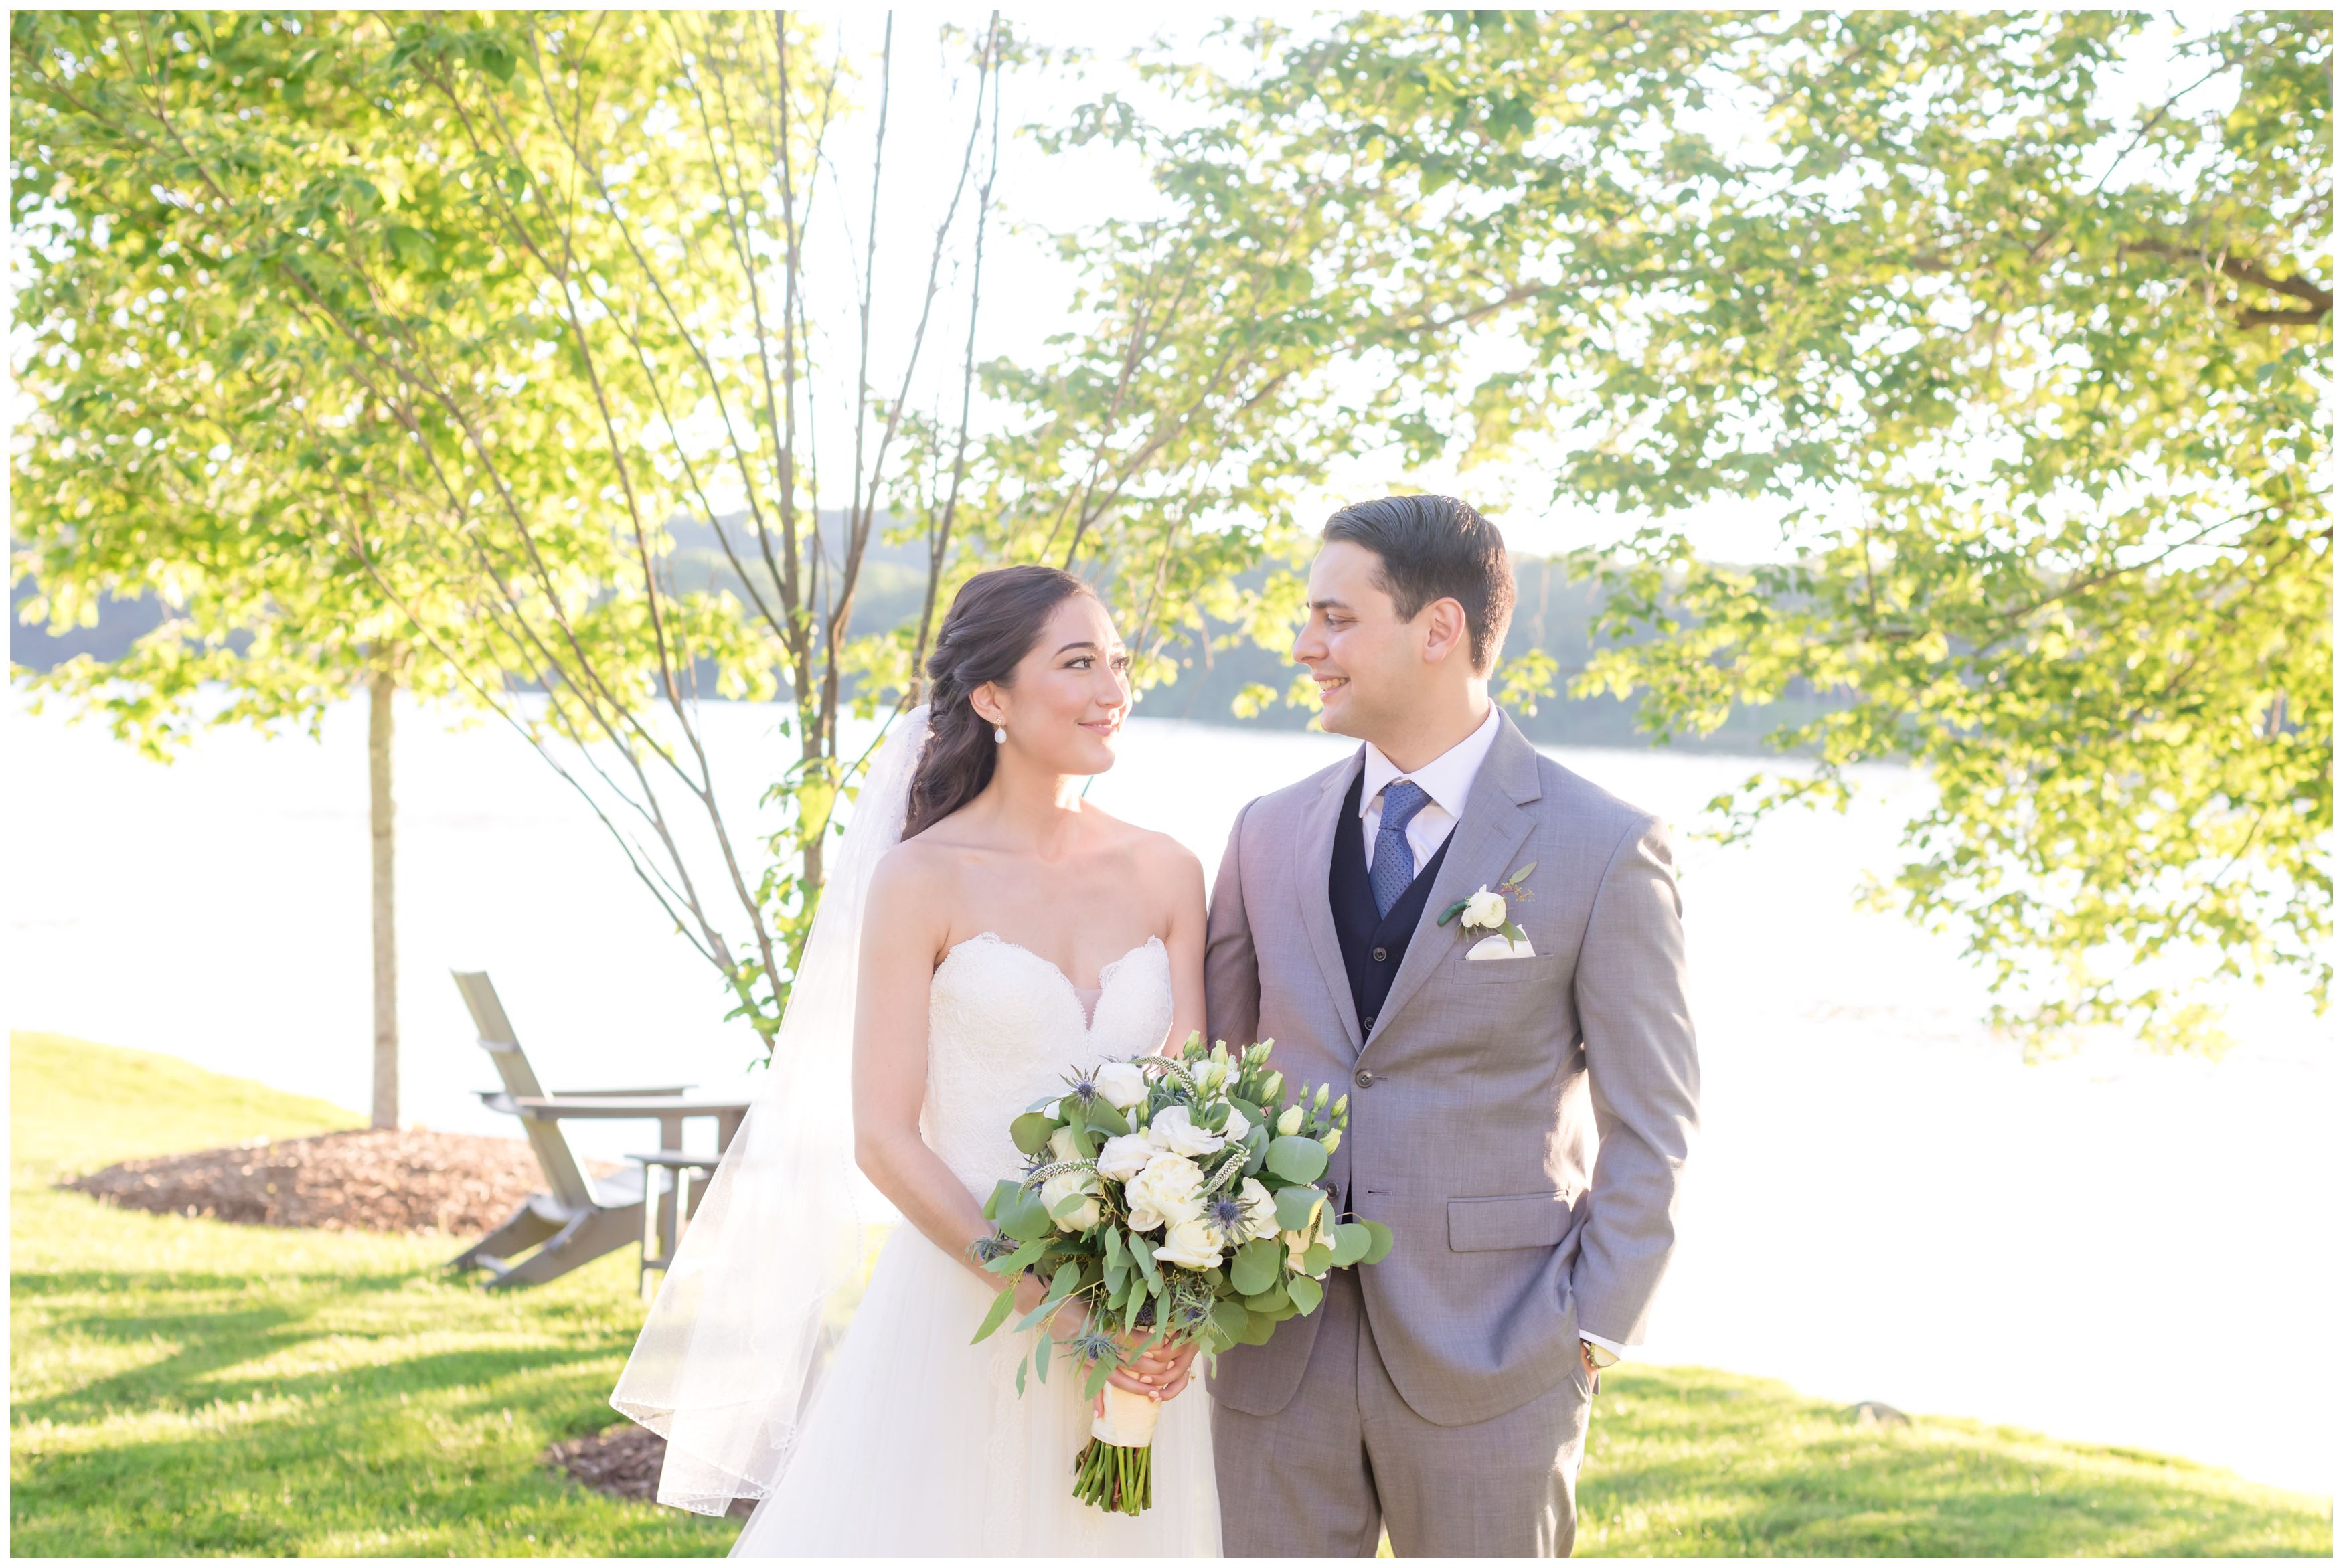 Bride and groom classic wedding portrait at outdoor lakeside summer wedding